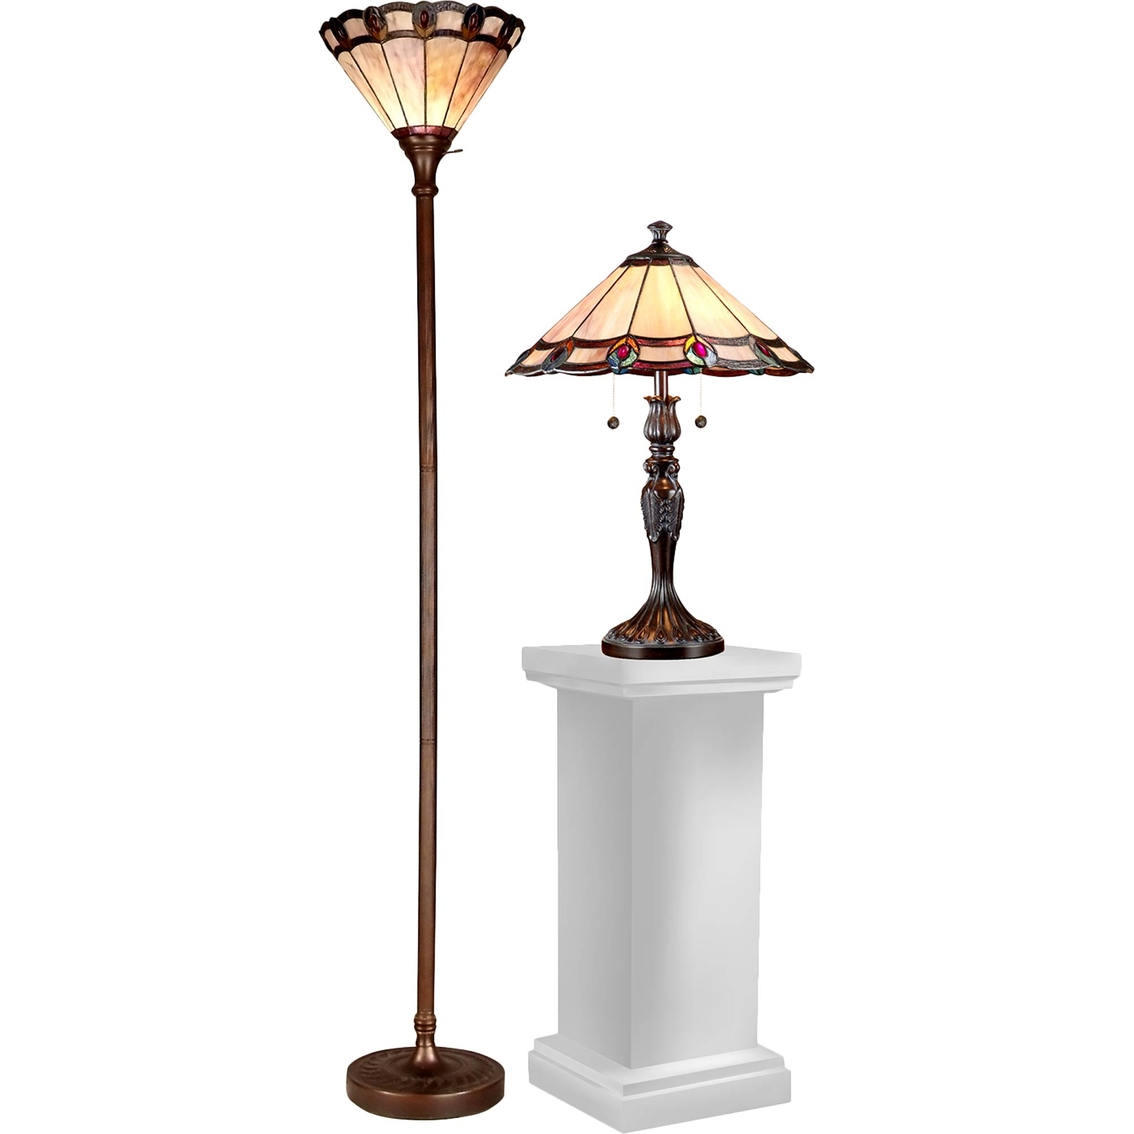 Dale Tiffany Peacock 2 Pc Torchiere Floor Lamp And Table with regard to sizing 1134 X 1134